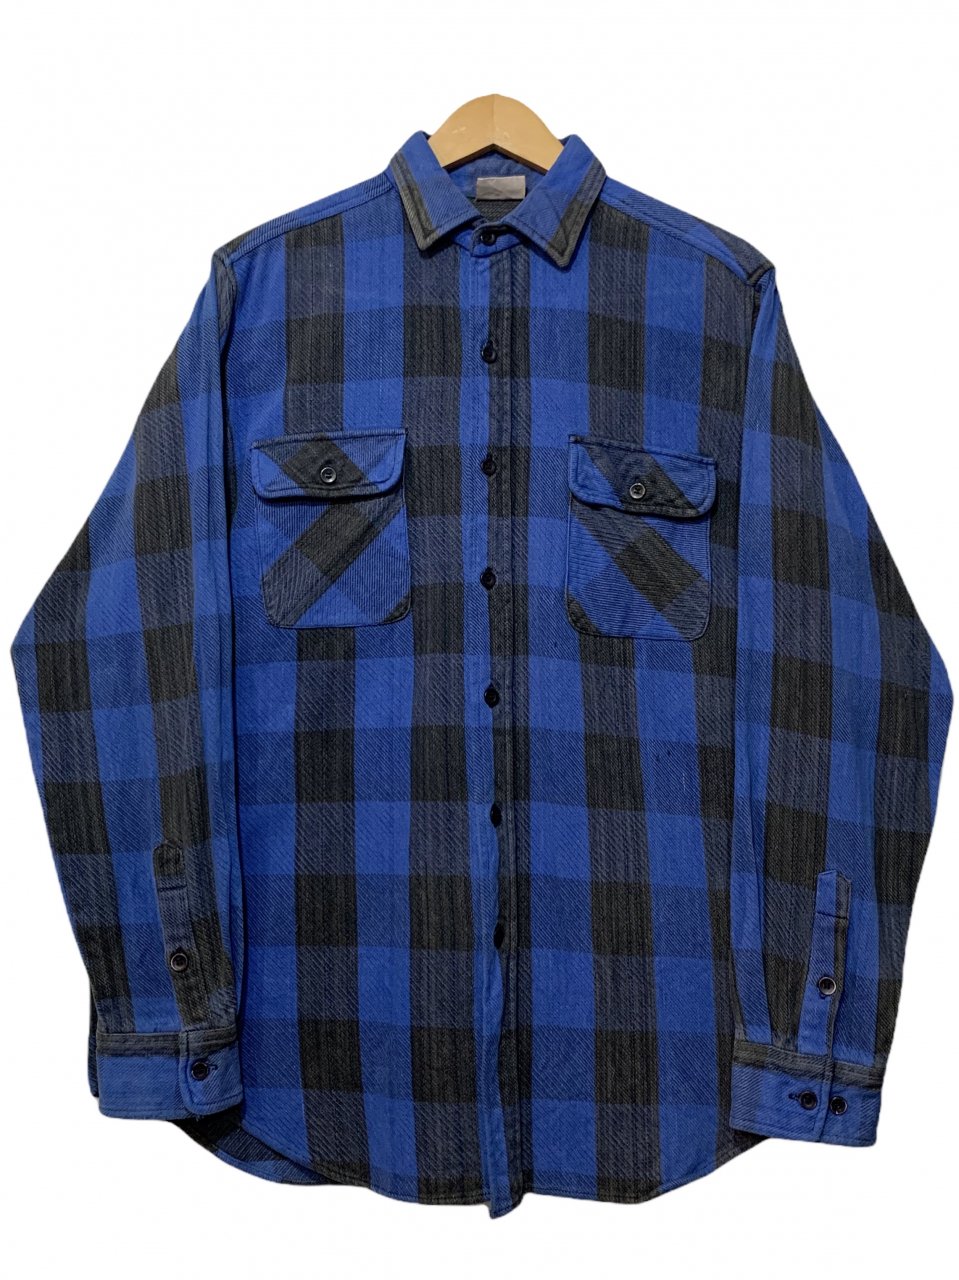 FIVE BROTHER 90s CHECK NEL SHIRT